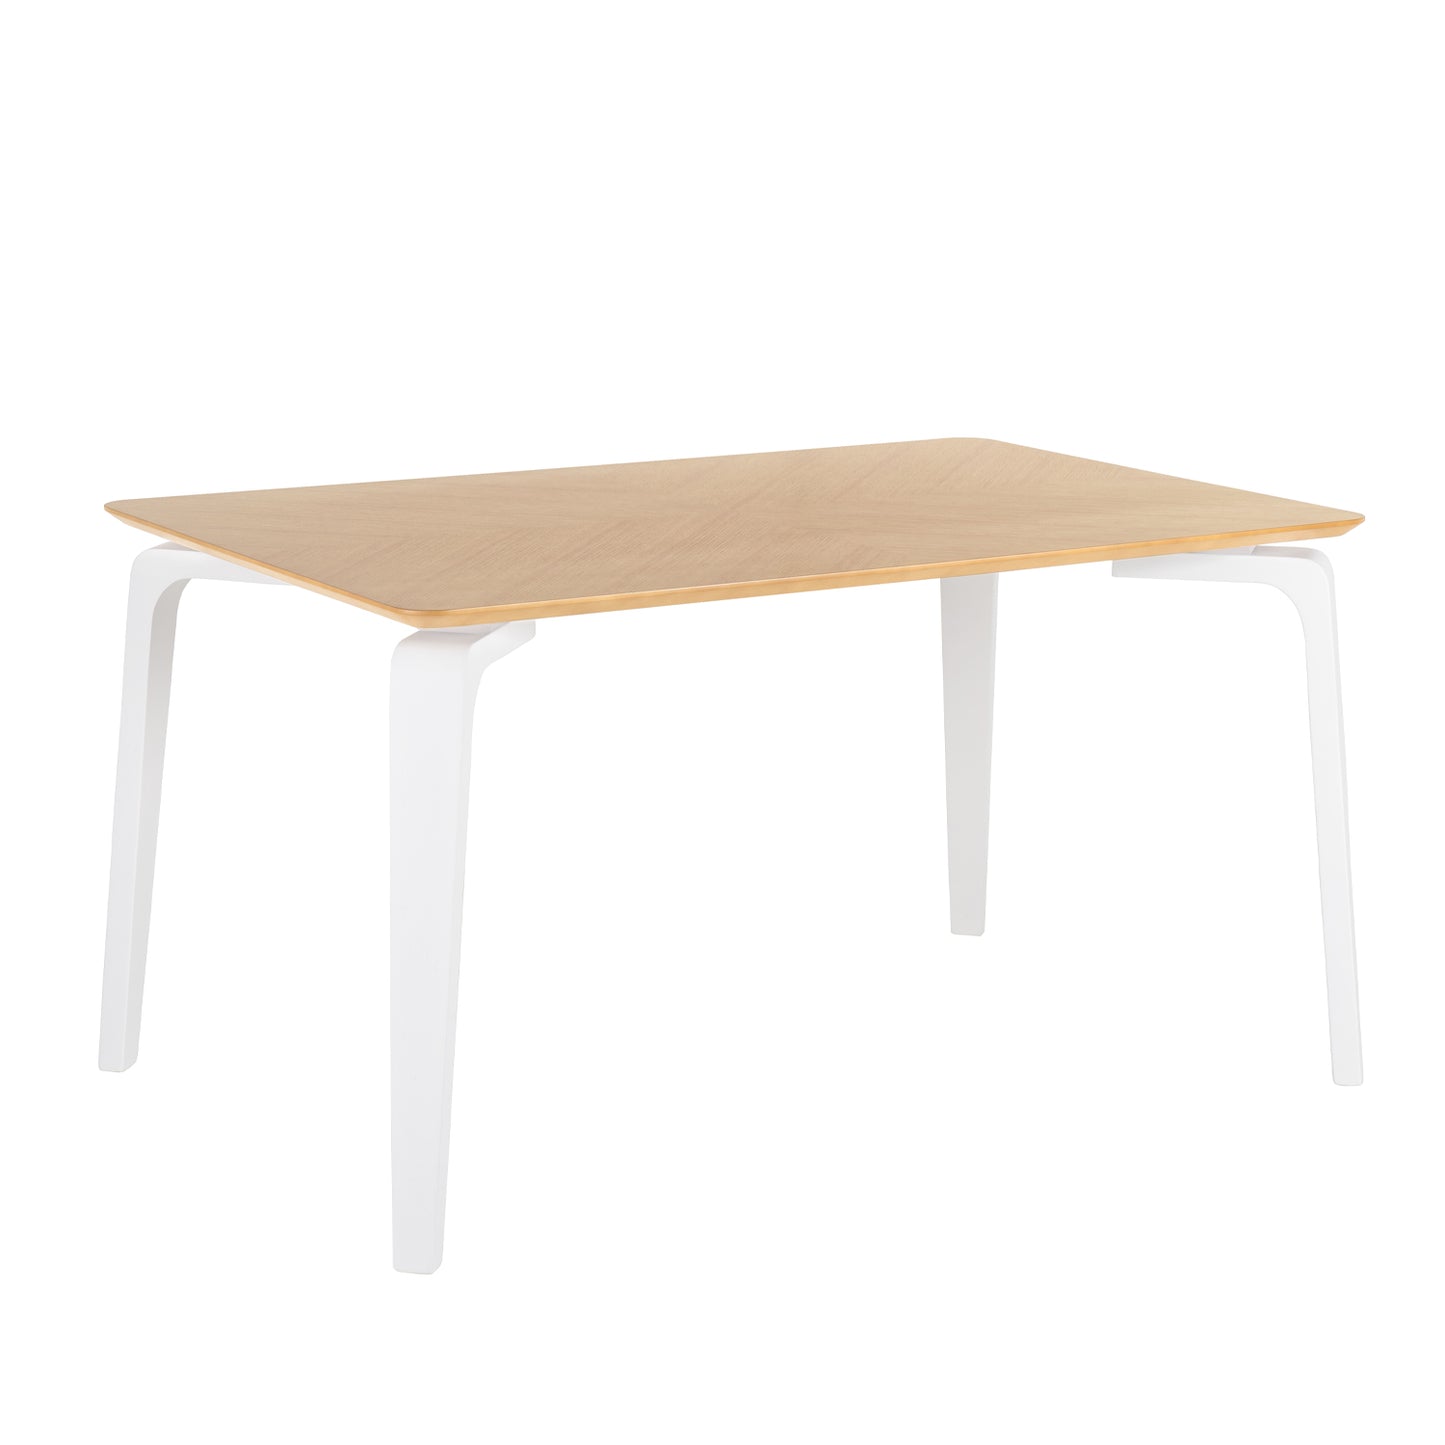 Stacy dining table